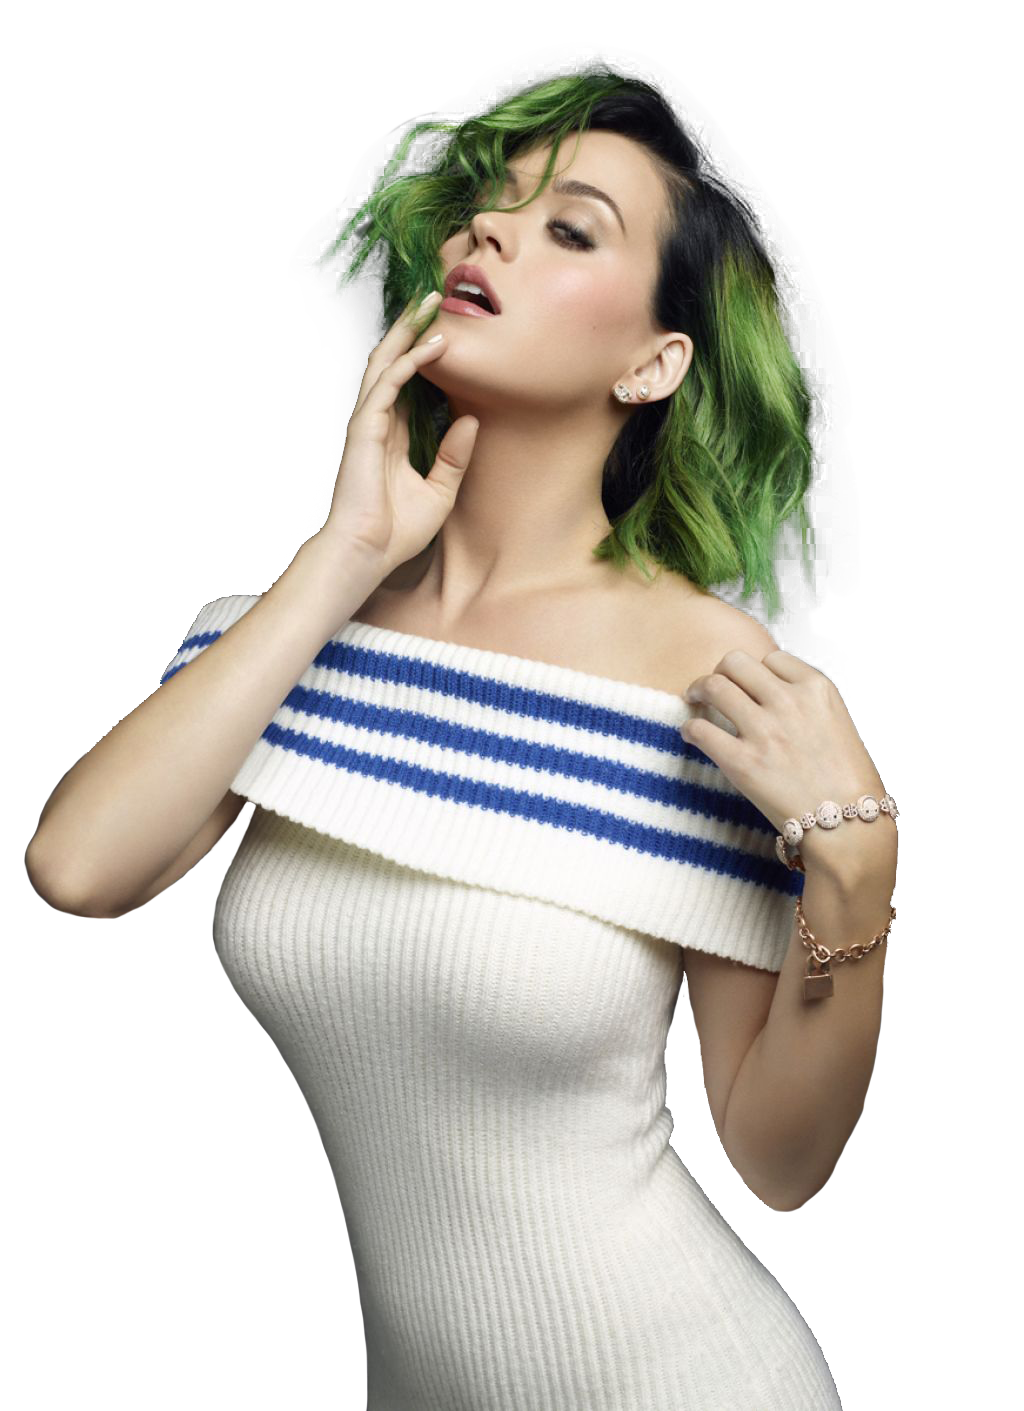 Katy Perry Photo PNG Image